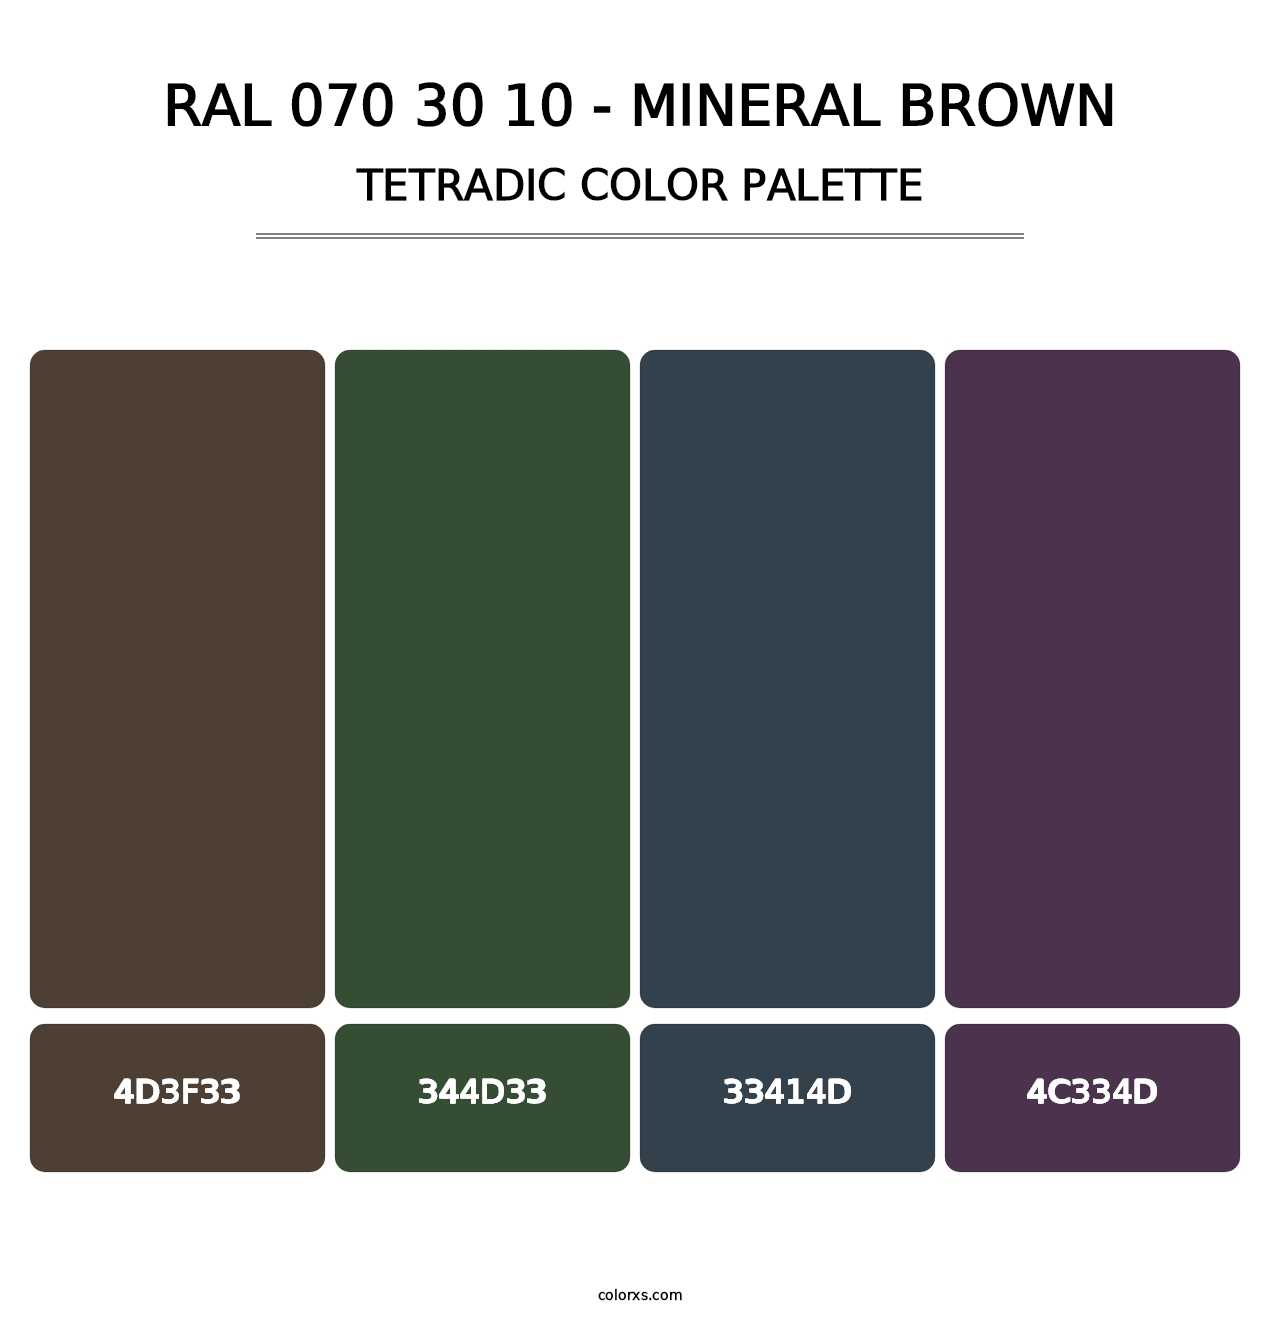 RAL 070 30 10 - Mineral Brown - Tetradic Color Palette